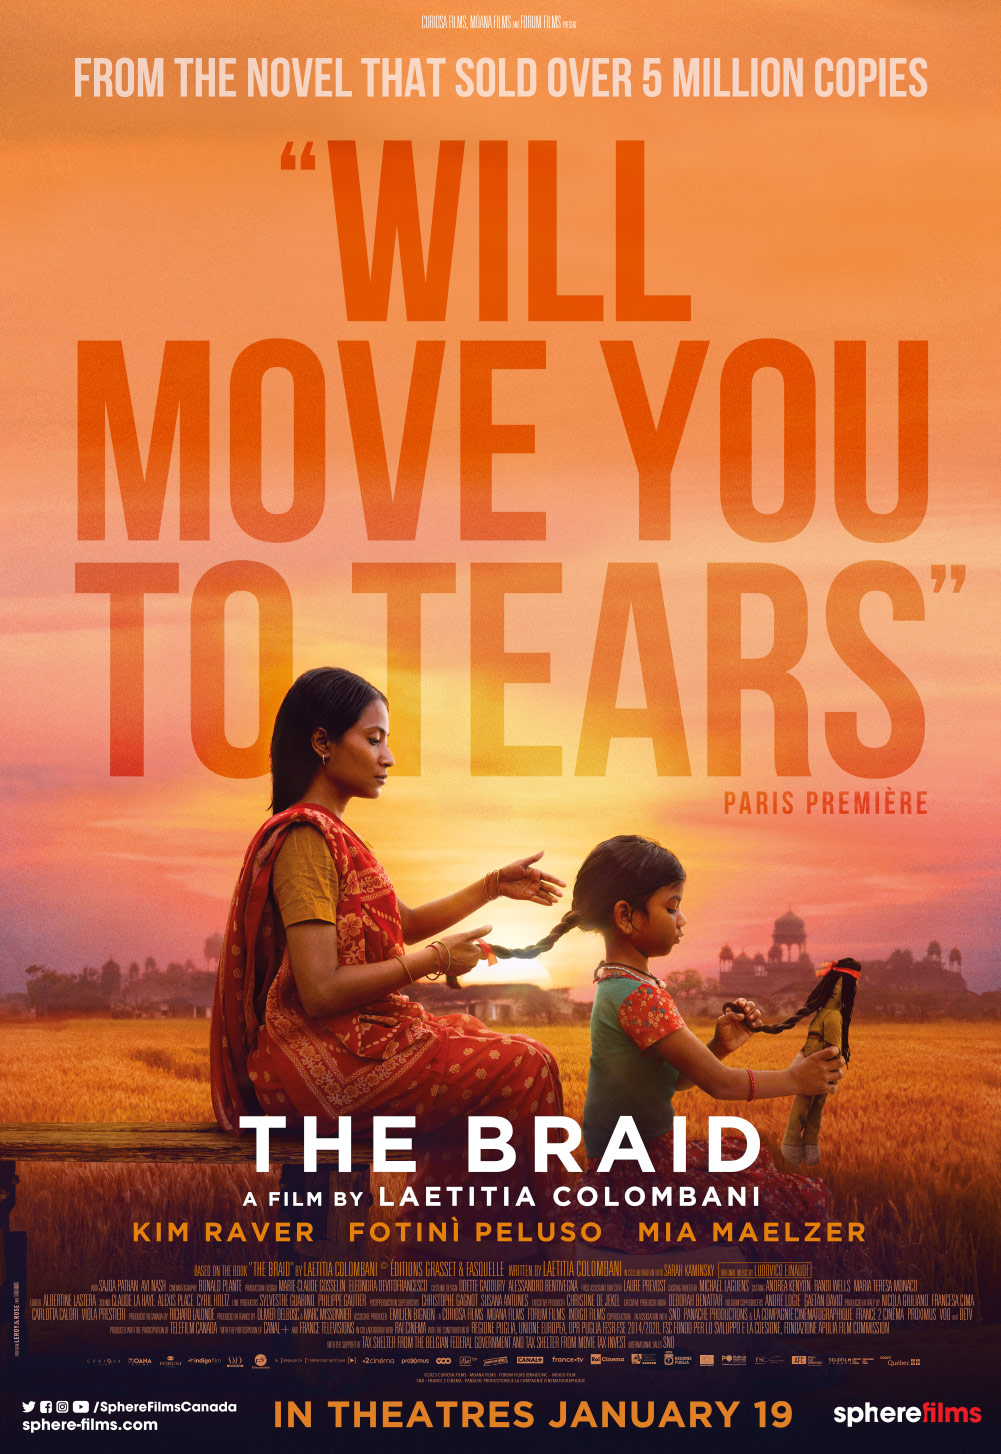 The Braid movie review - based on the best-selling novel